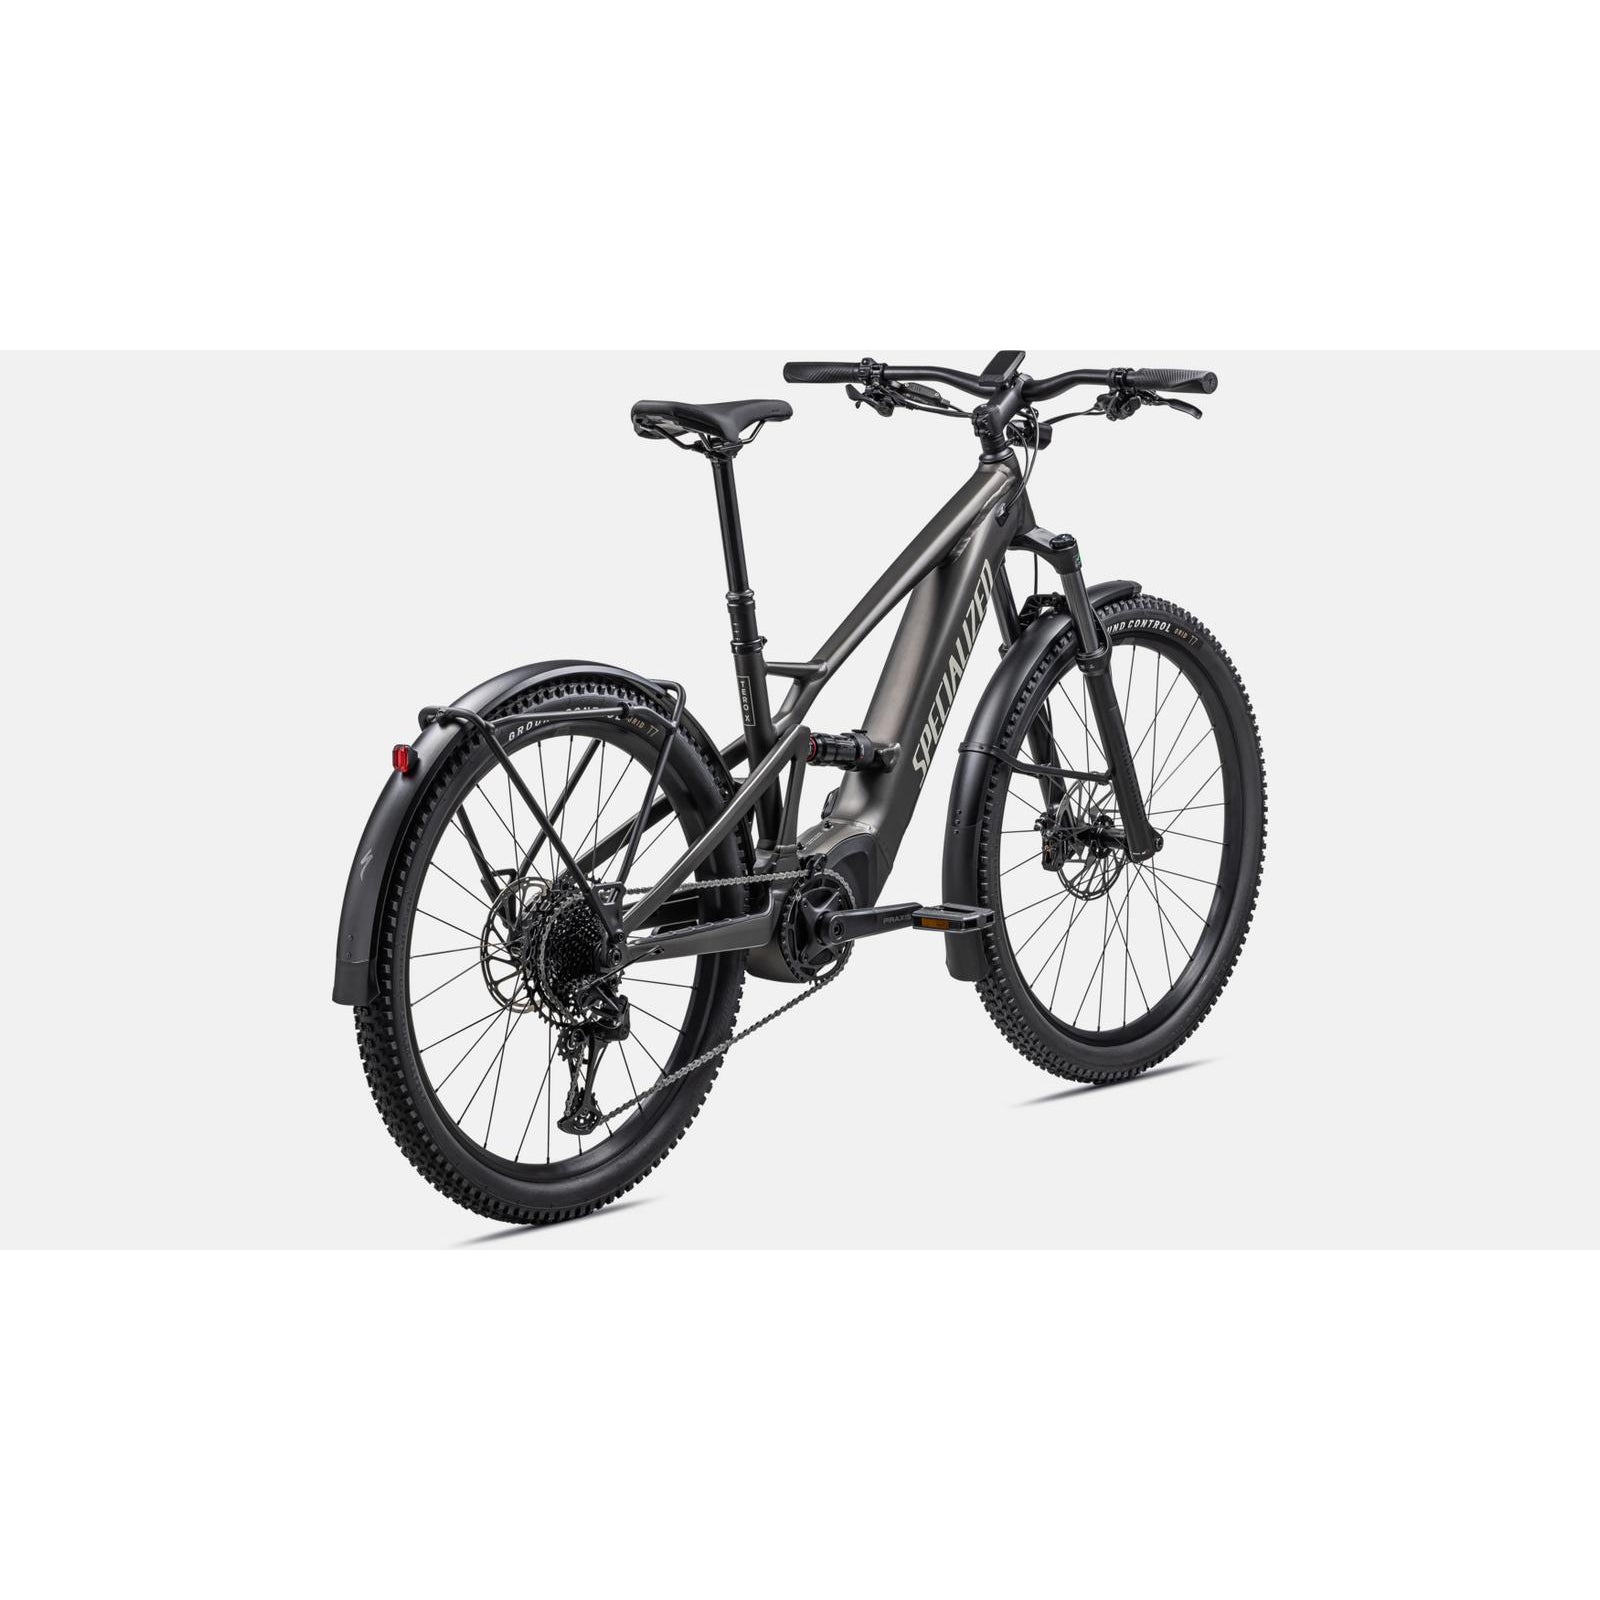 Specialized Turbo Tero X 4.0 29" Full Suspension Electric Bike - Bikes - Bicycle Warehouse